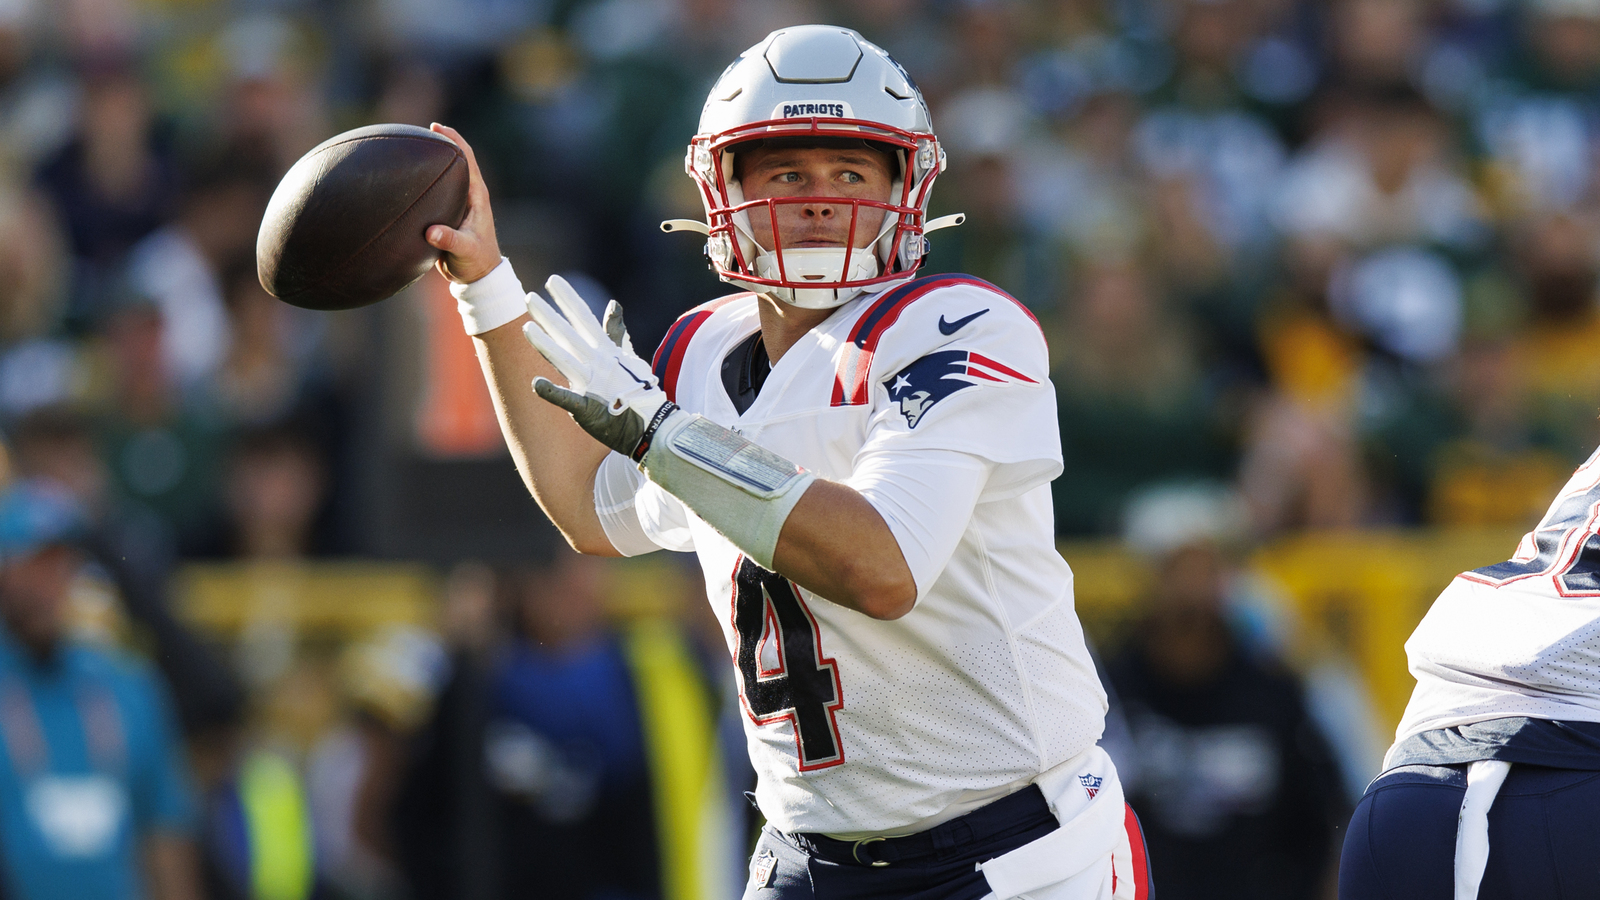 Who is Bailey Zappe, the rookie who may start at QB for Patriots?